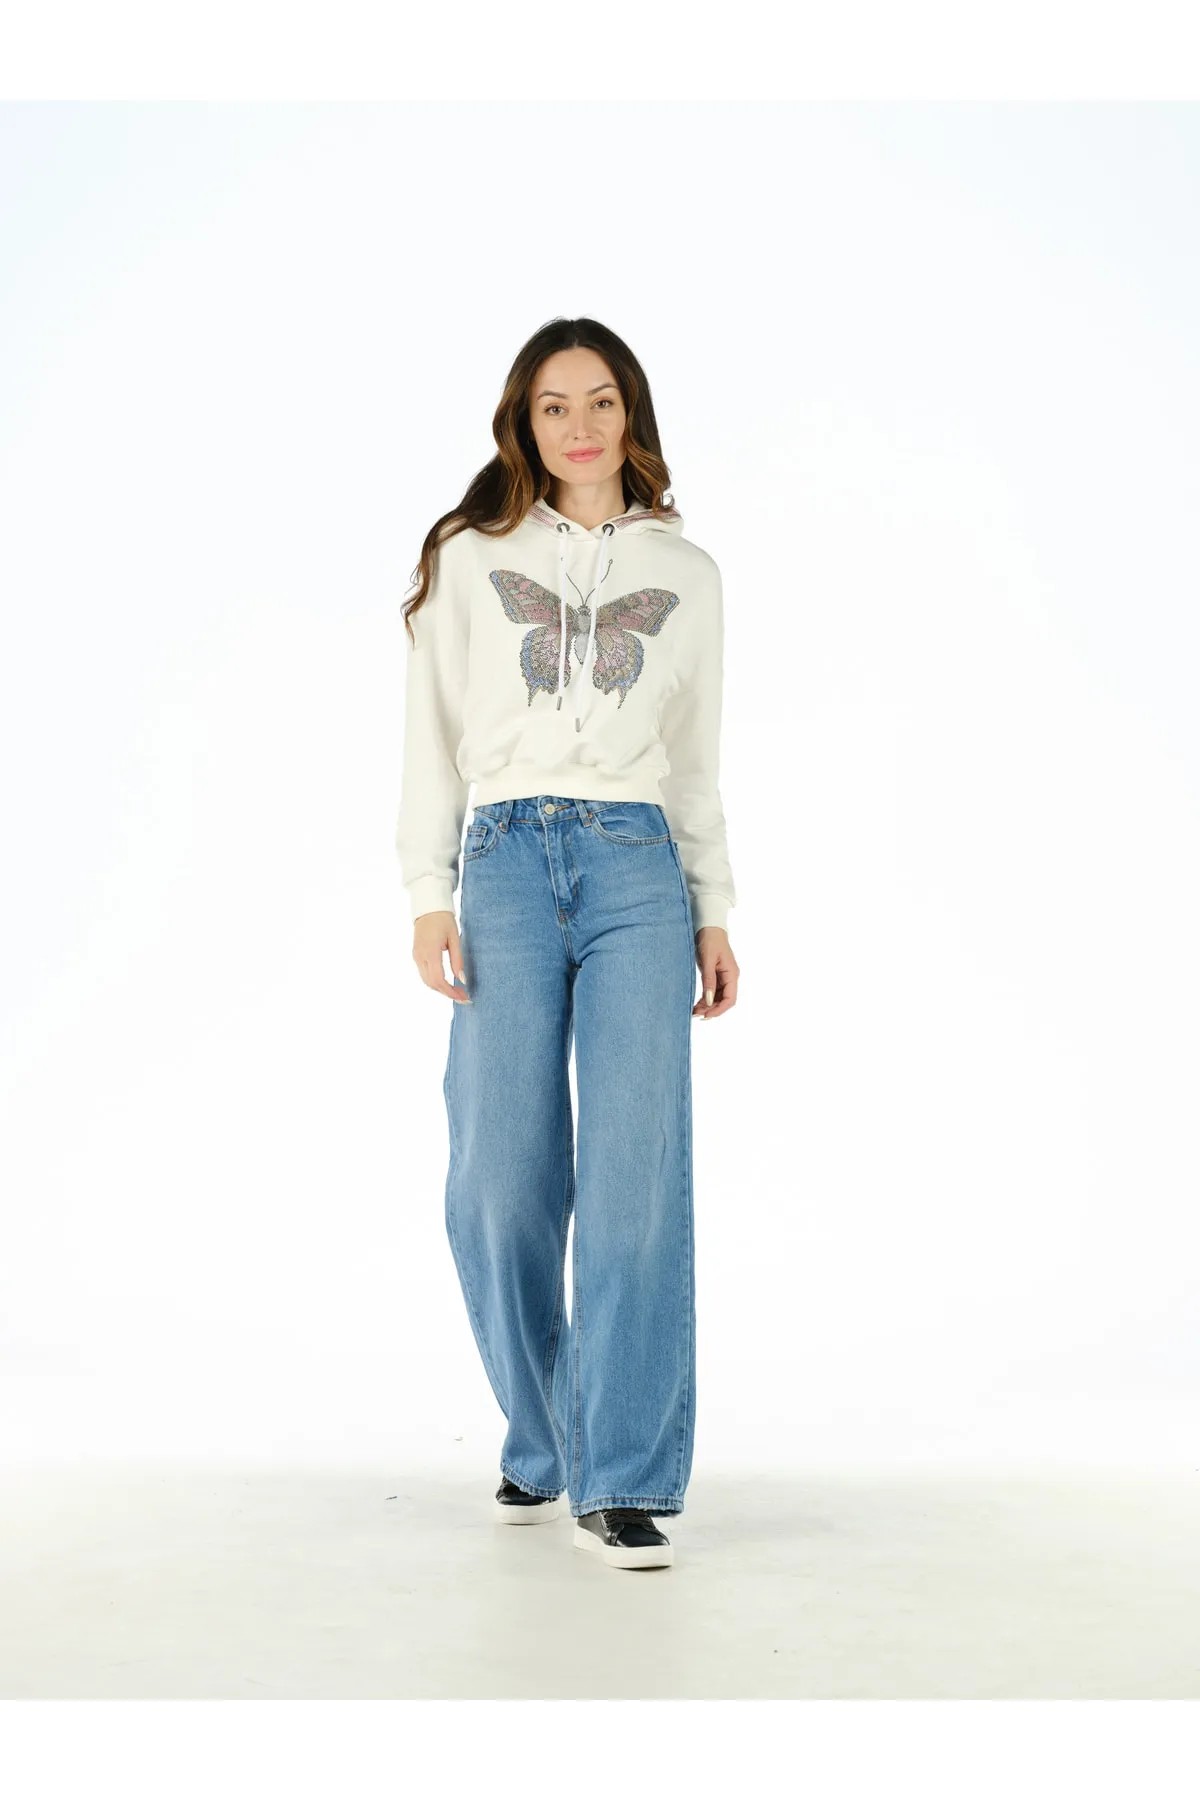 CRYSTAL STONE EMBROIDERED BUTTERFLY PATTERNED WHITE SWEATSHIRT HOODED